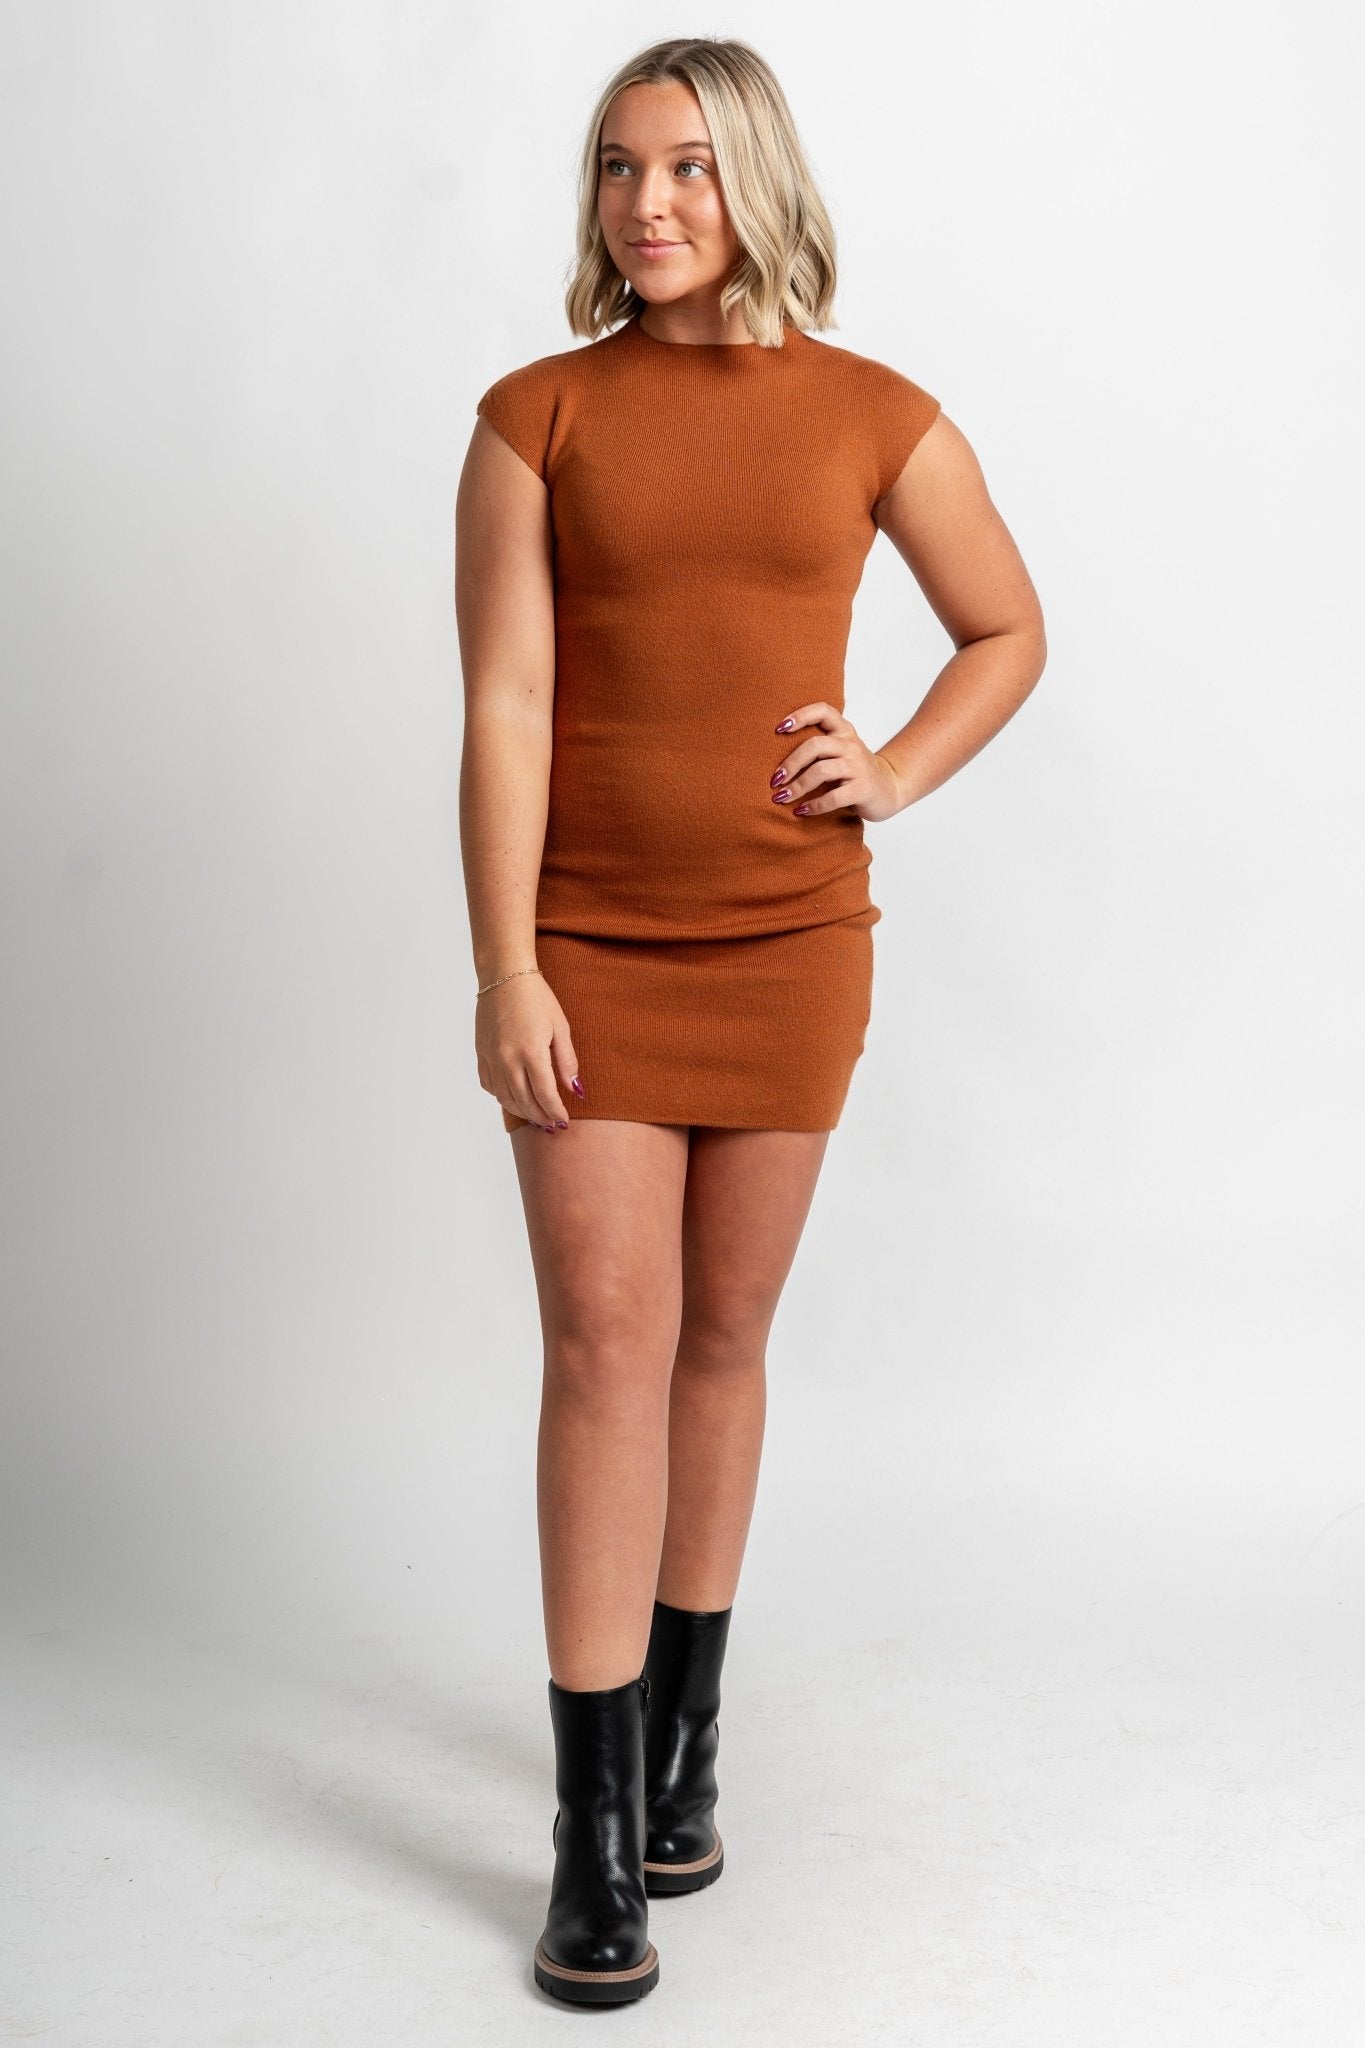 Sleeveless knit bodycon dress rust - Trendy Dresses - Fashion Dresses at Lush Fashion Lounge Boutique in Oklahoma City